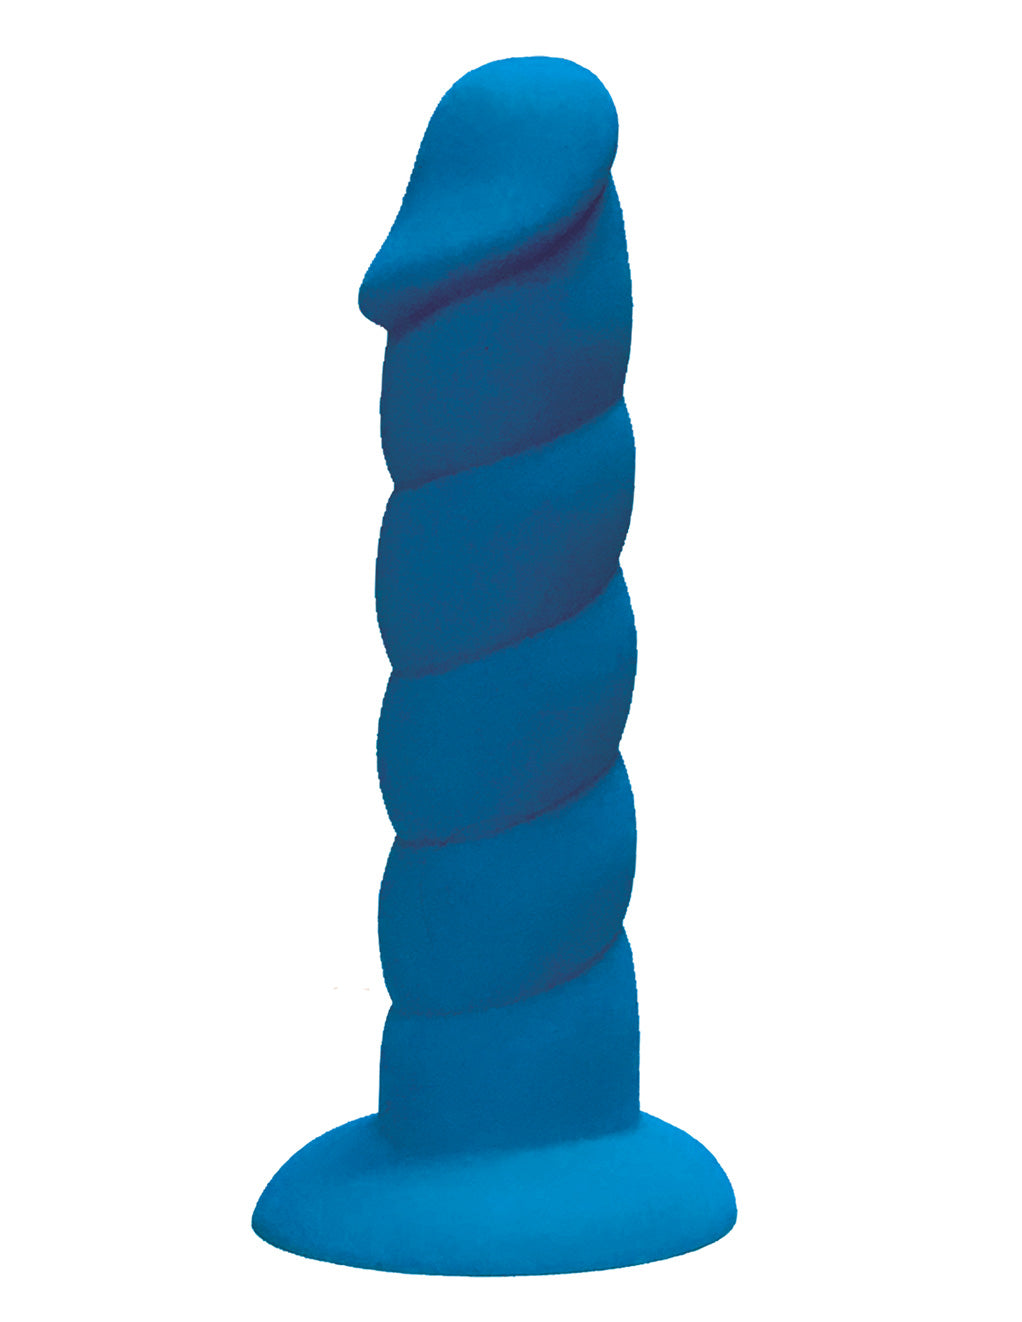 Suga Daddy 8 Inch Suction Cup Dildo by HUSTLER® pic